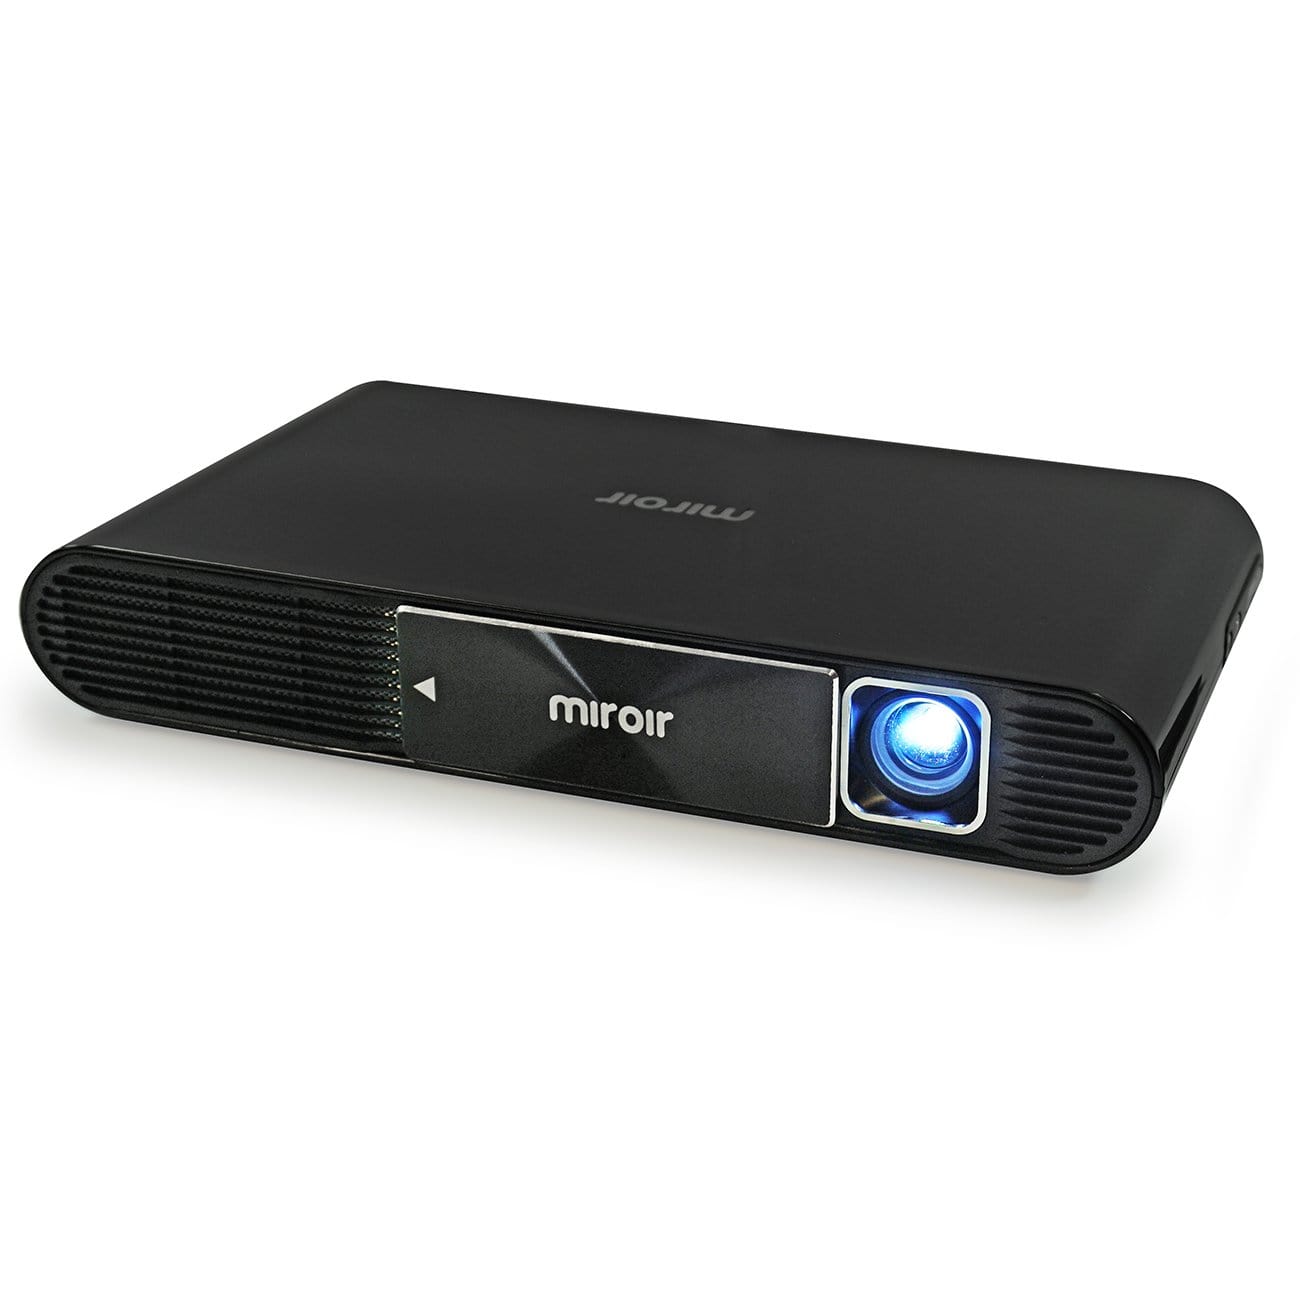 Miroir M631 Ultra Pro 1080p Projector, 700 LED Lumens, Battery-Powered, USB Type C Video and Charge